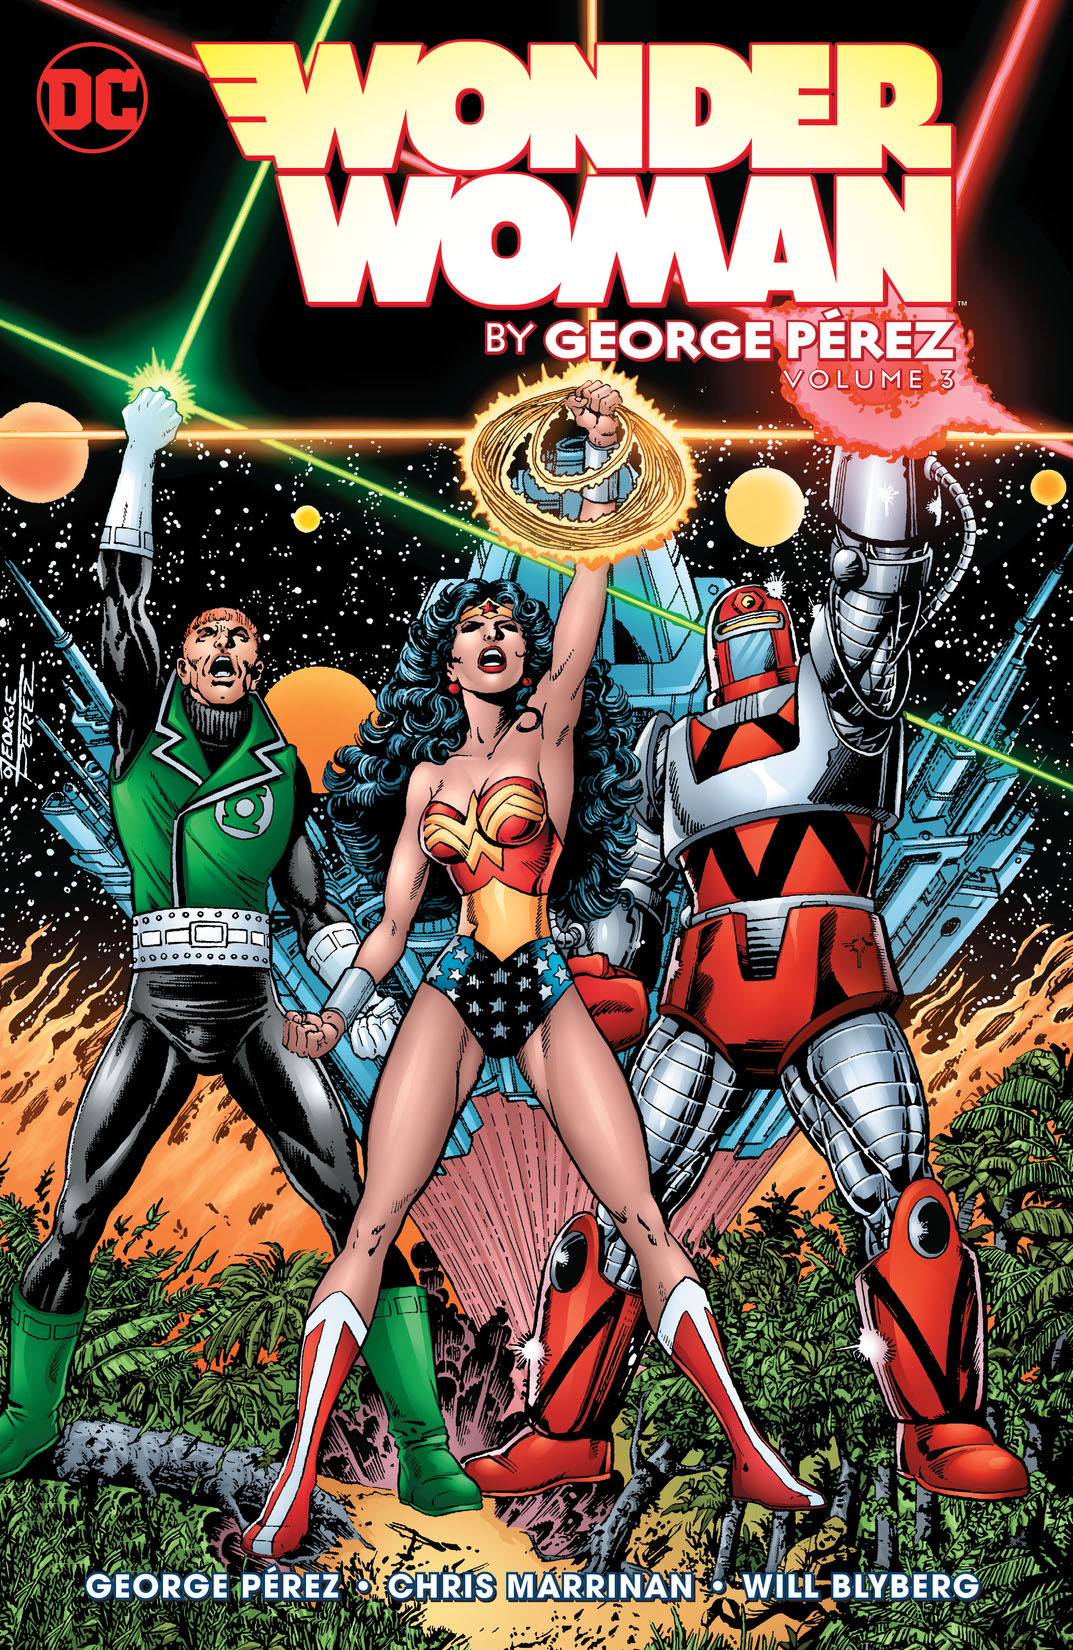 Wonder Woman by George Perez Vol. 3 preview images